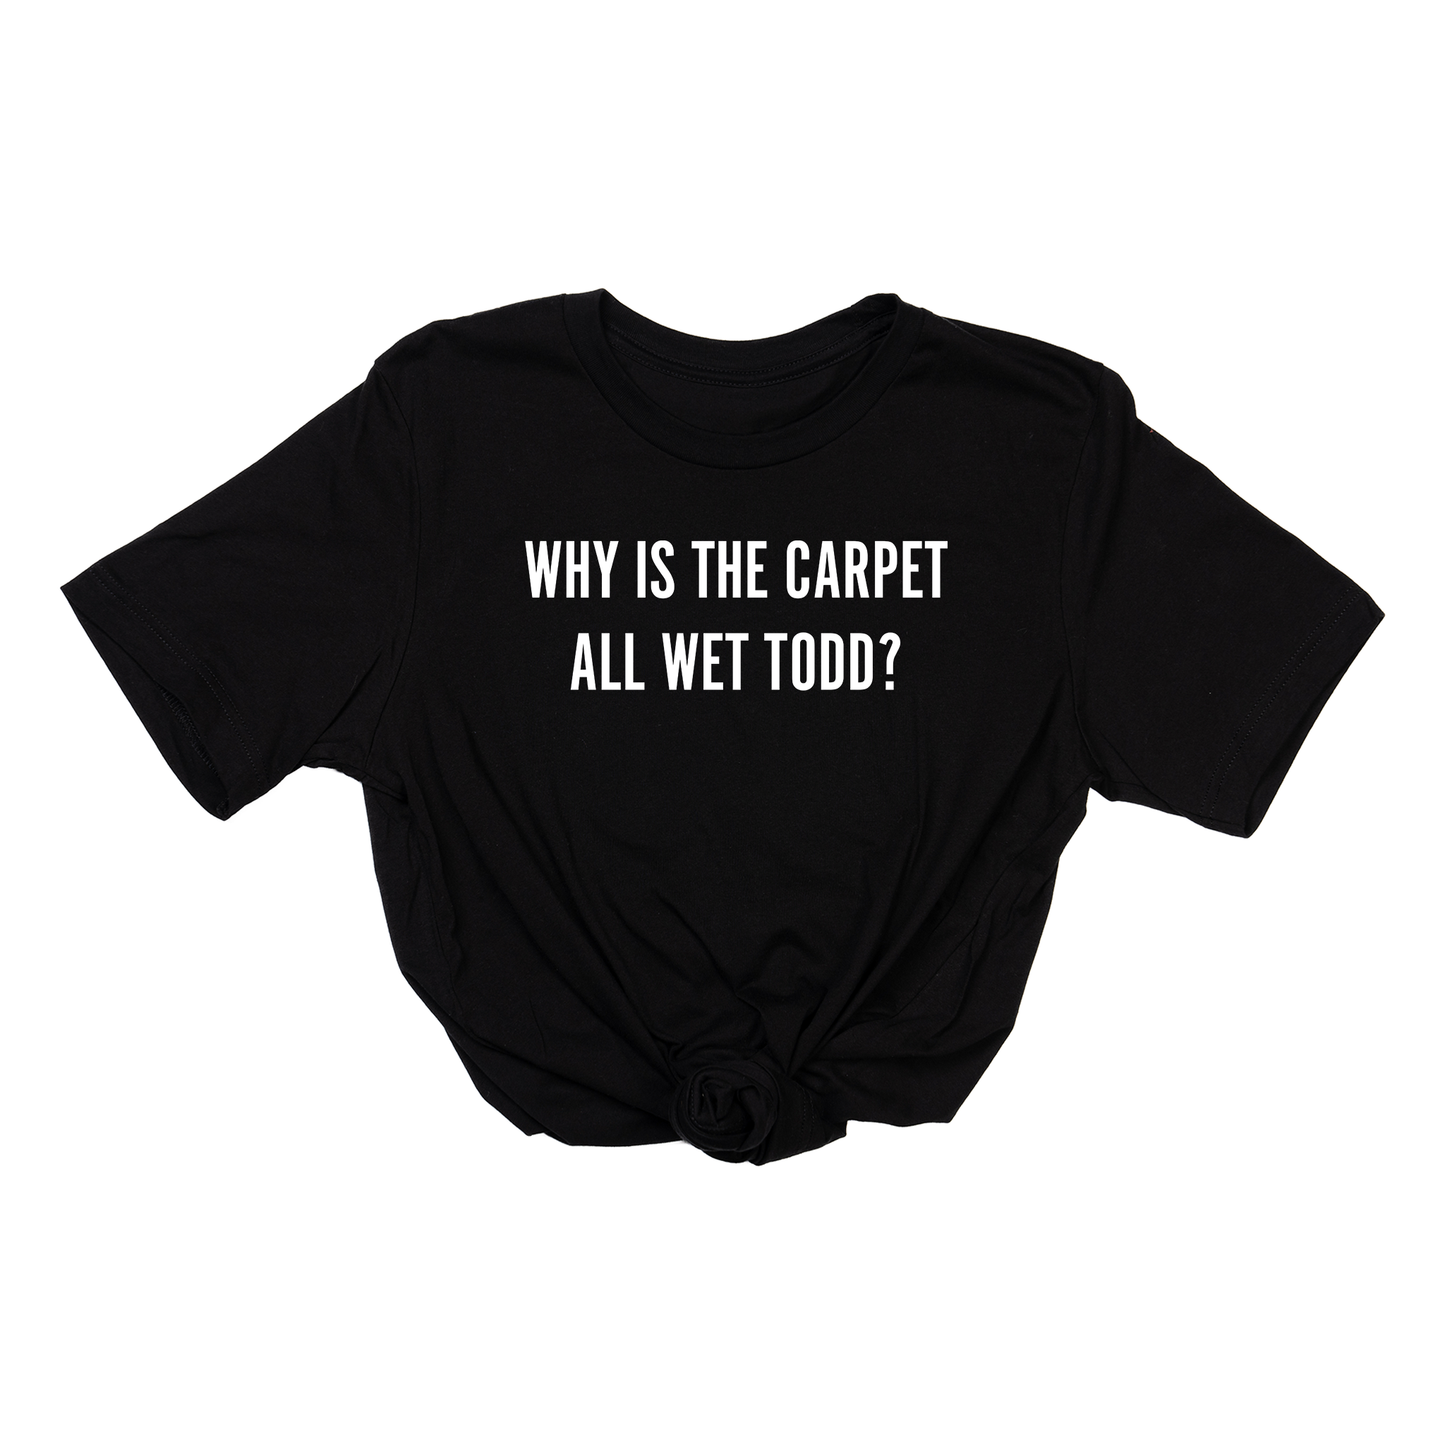 Why Is The Carpet All Wet Todd (White) - Tee (Black)